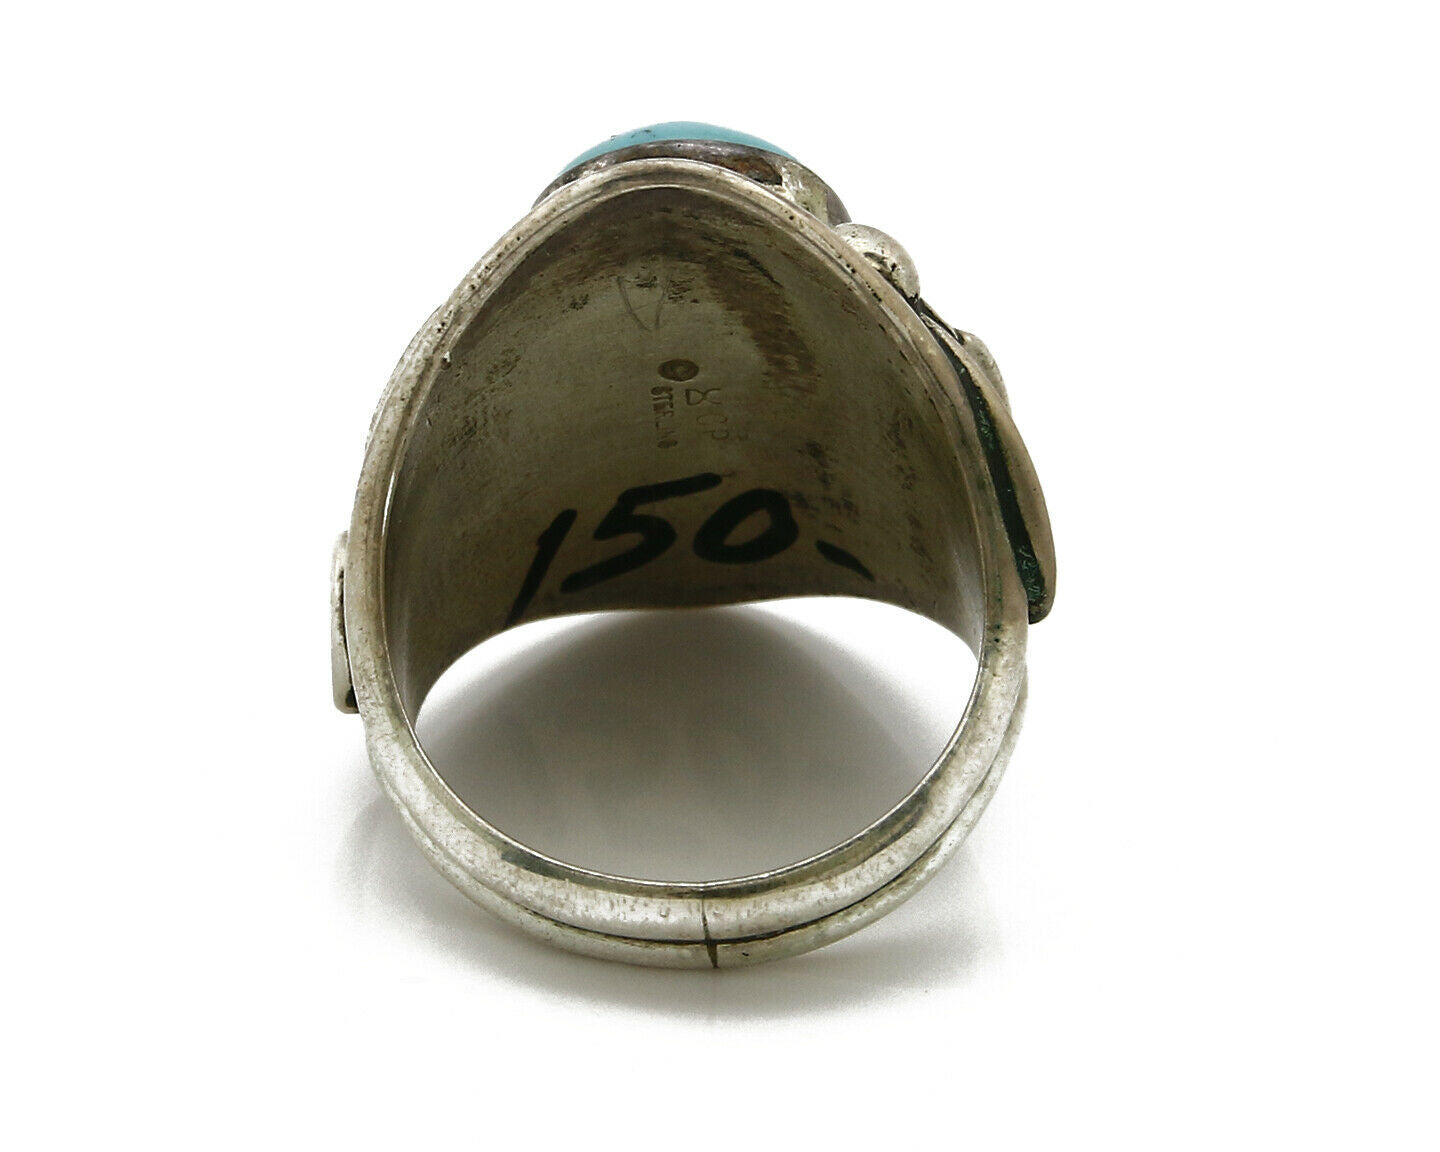 Men's Navajo Ring .925 Silver Natural Turquoise Handmade C.80's Signed CP